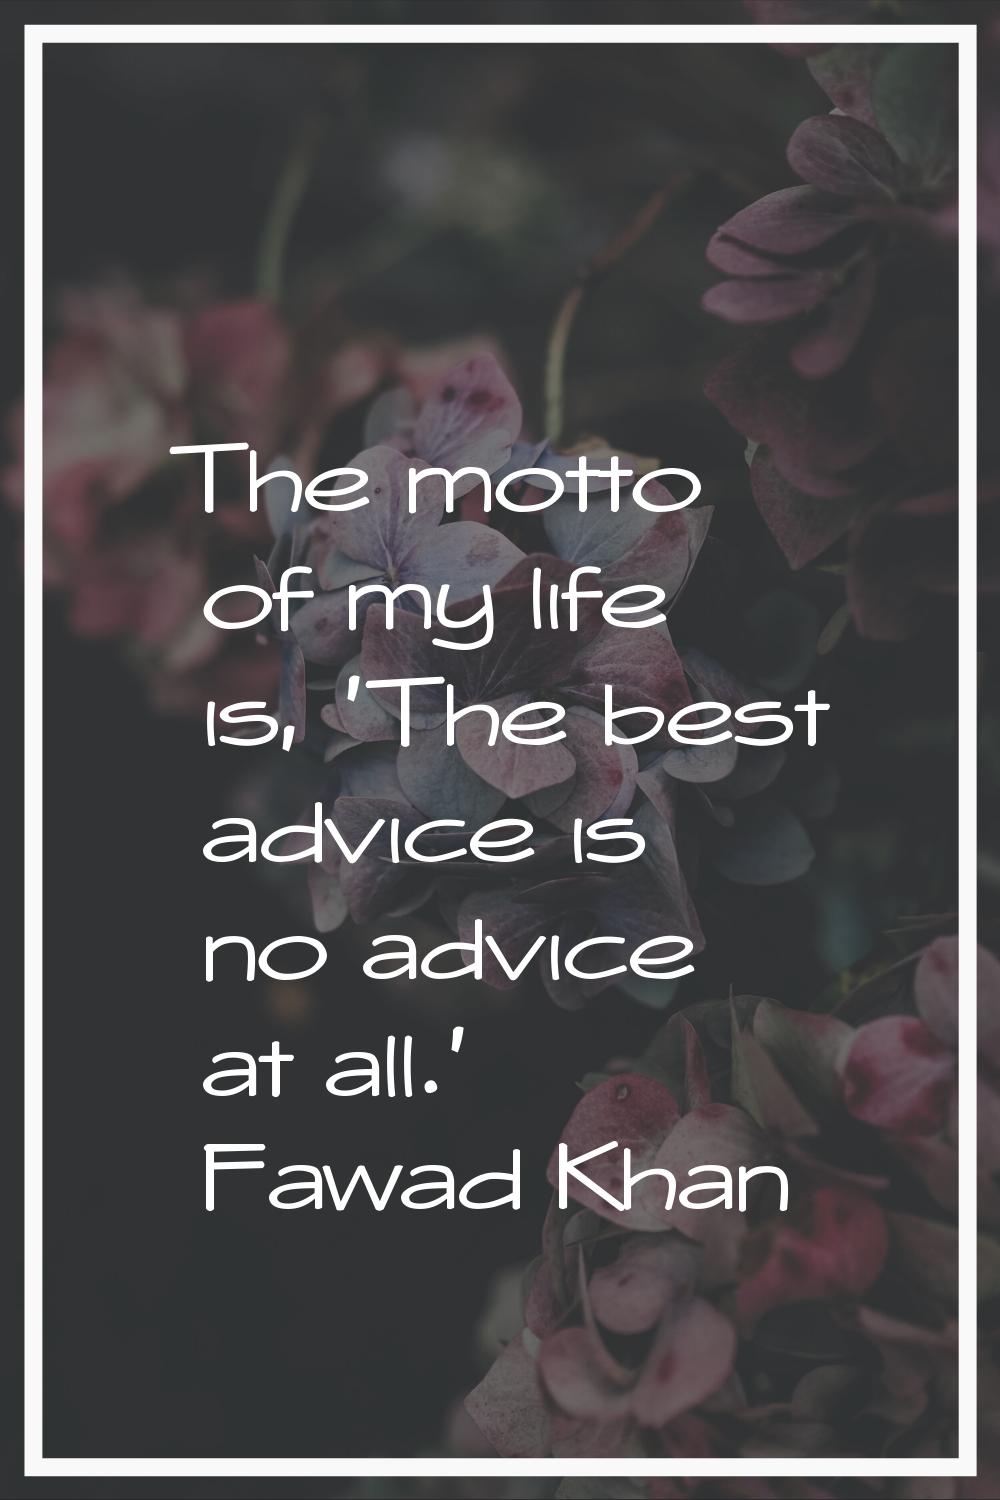 The motto of my life is, 'The best advice is no advice at all.'